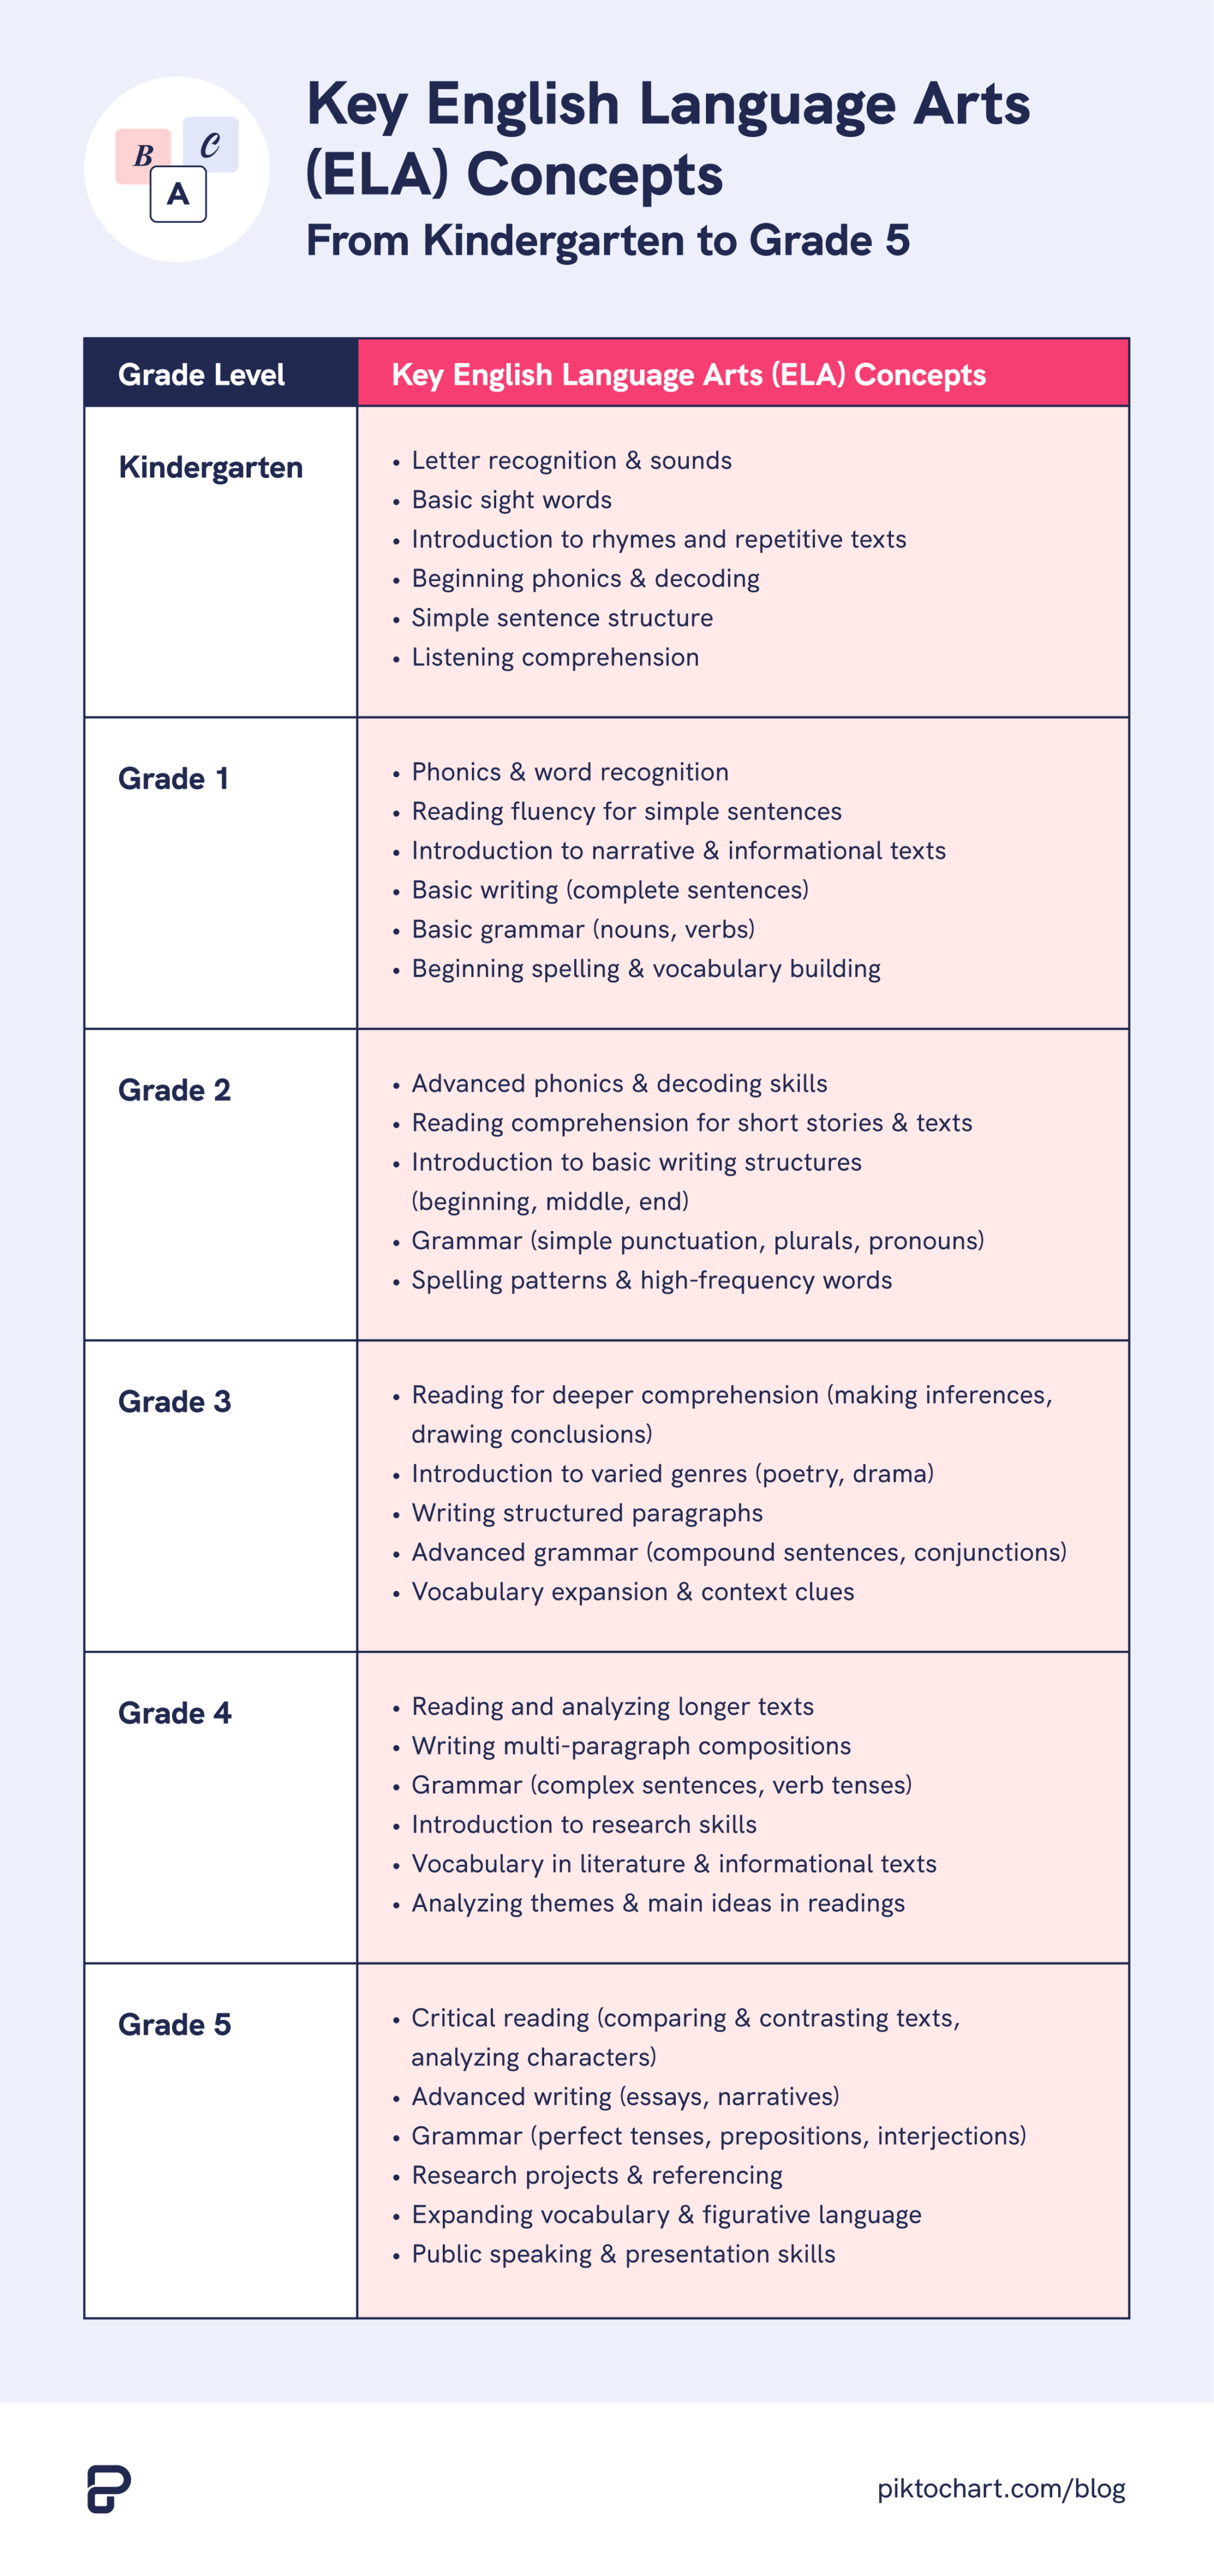 table of key english language arts concepts based on various grade levels